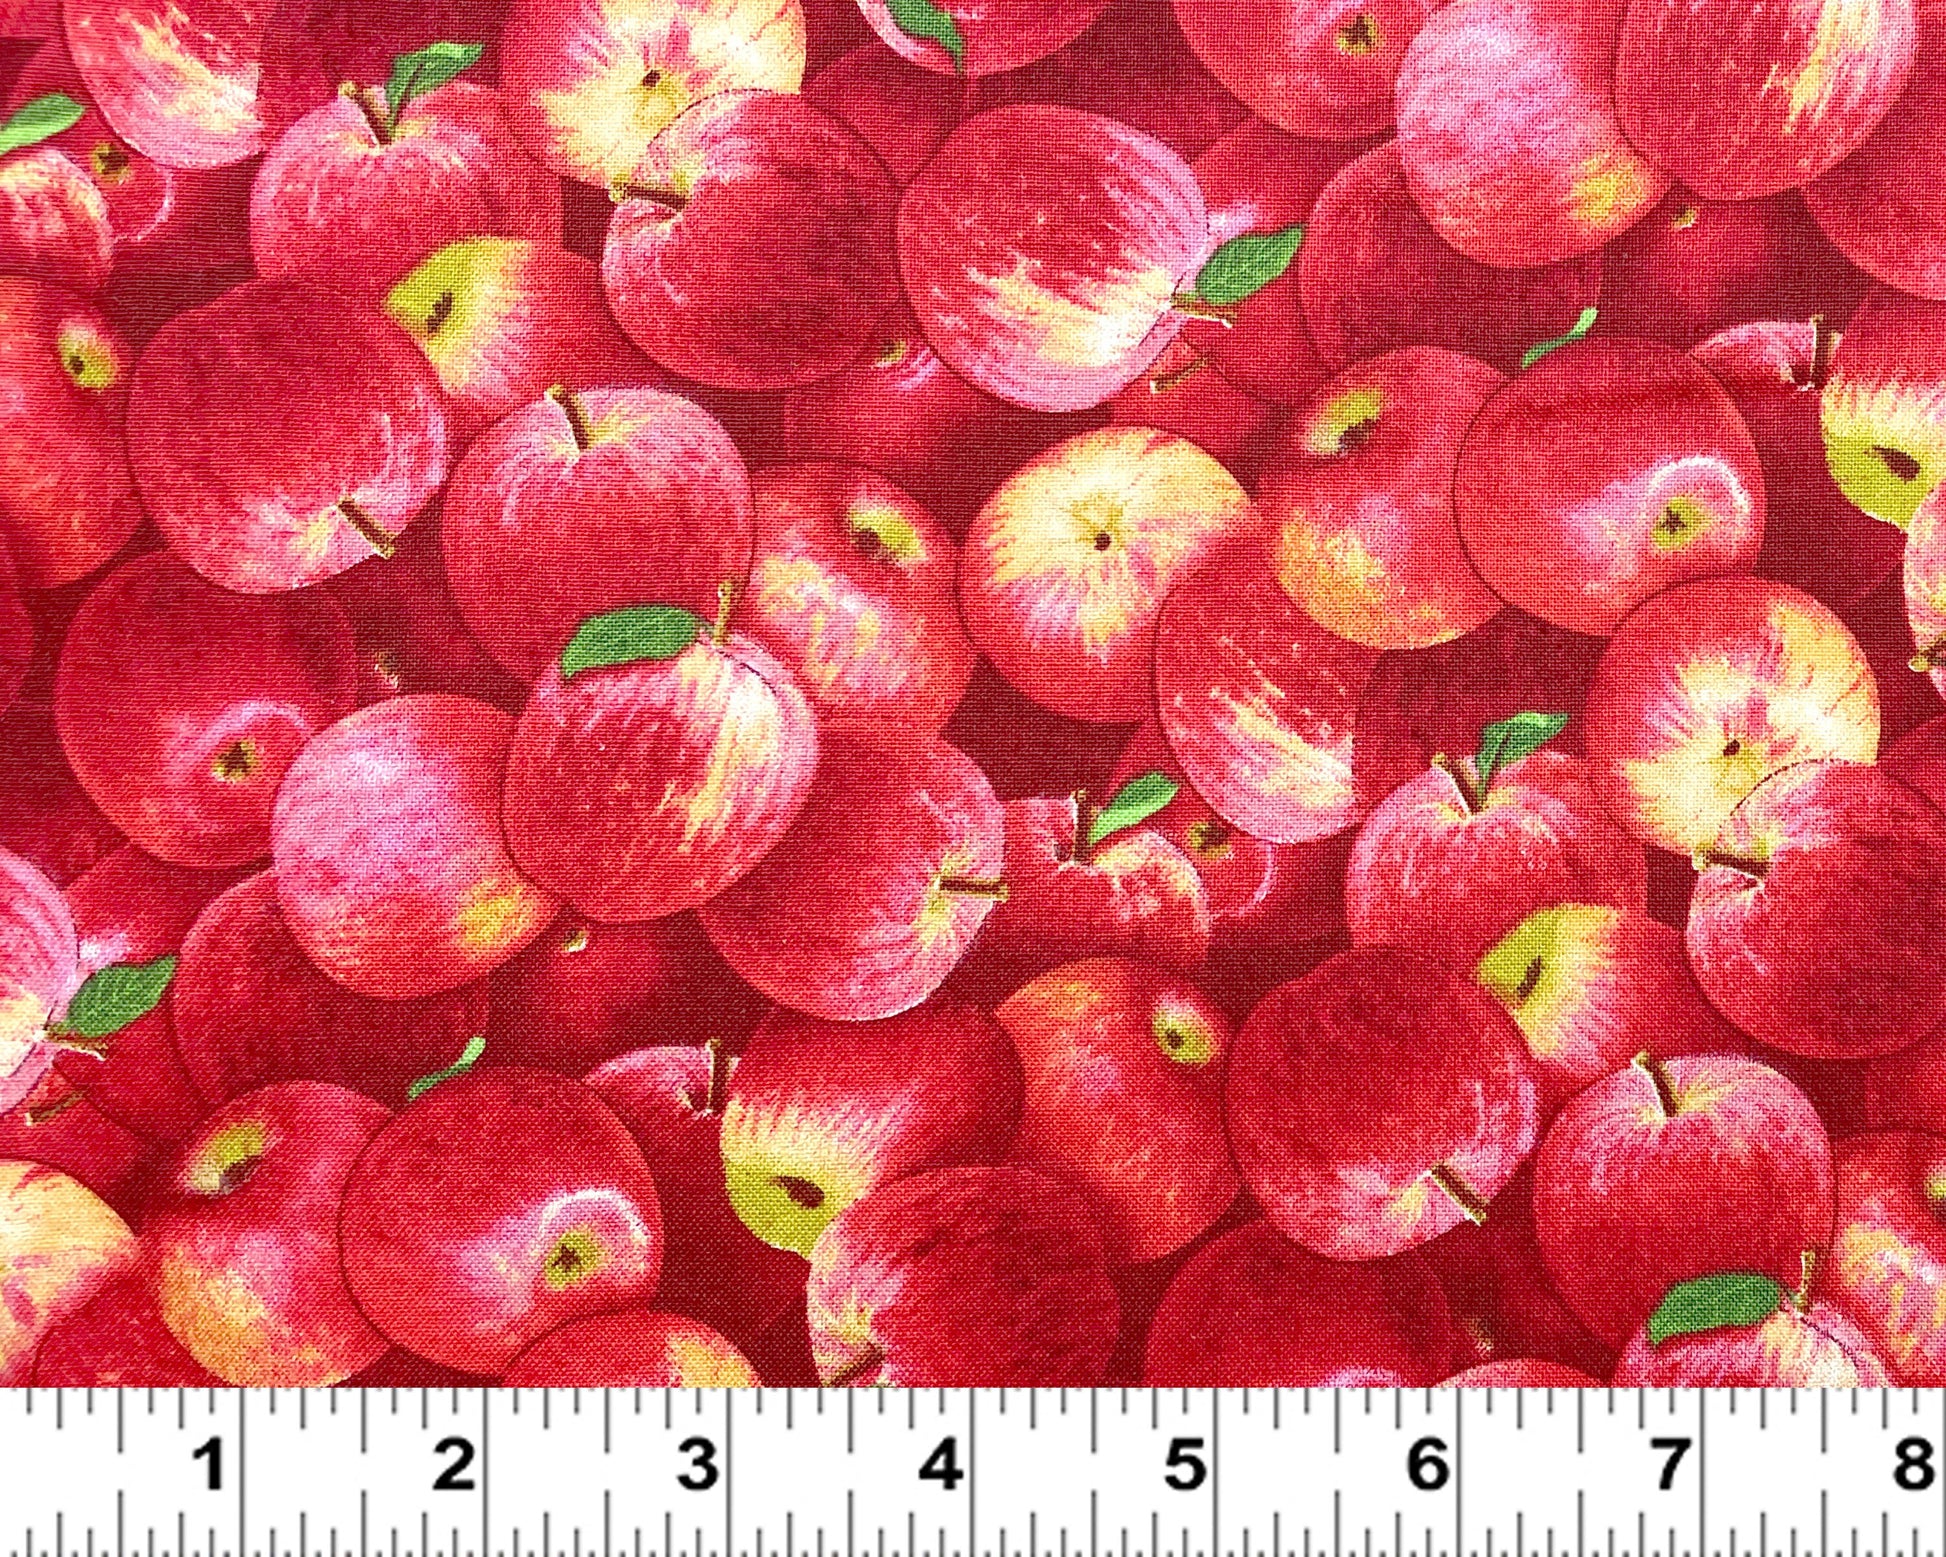 Red Apple Fabric - Food Festival collection by Elizabeth Studios - 100% Cotton Fabric - Food theme Healthy Fruit Snack - Ships NEXT DAY